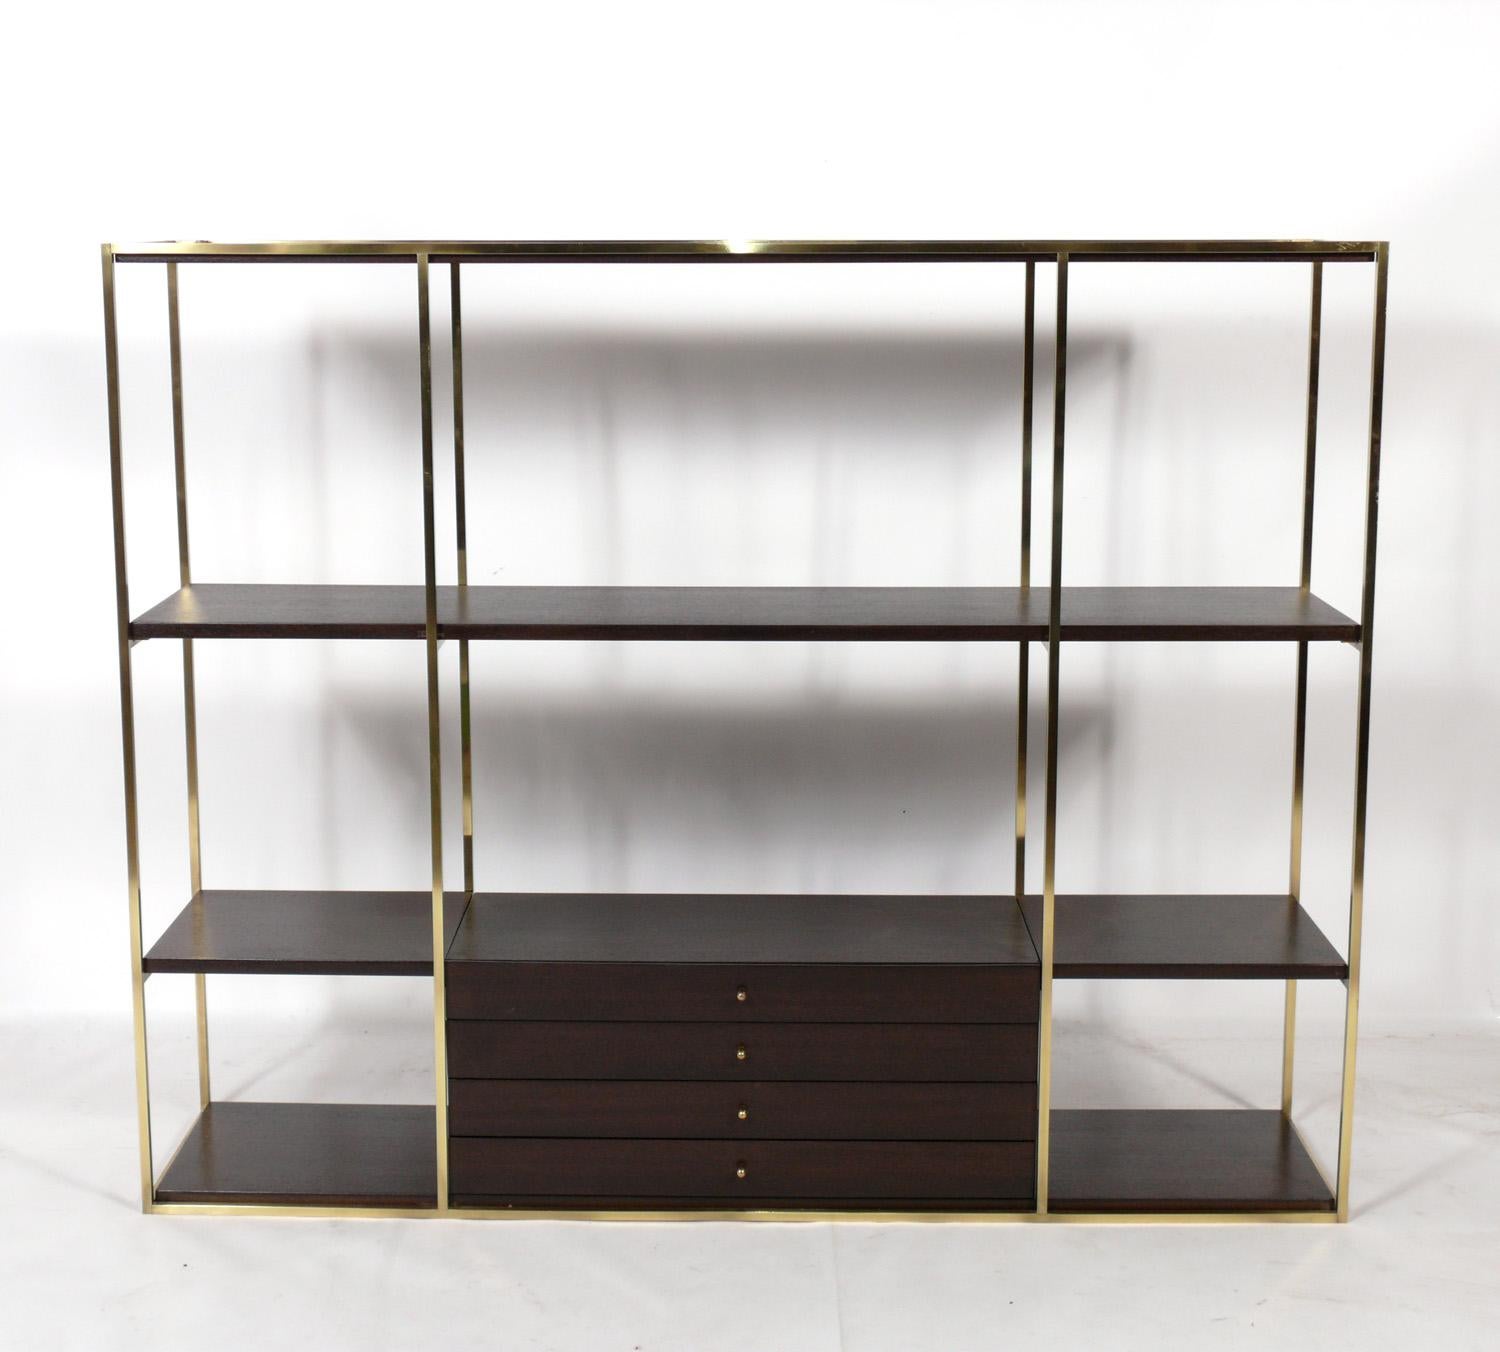 Clean Lined Mid Century Modern étagère or bookshelf, designed by Paul McCobb for Calvin, American, circa 1950s. Signed inside drawer. It has been completely restored in a deep brown color finish and the brass portions have been polished and